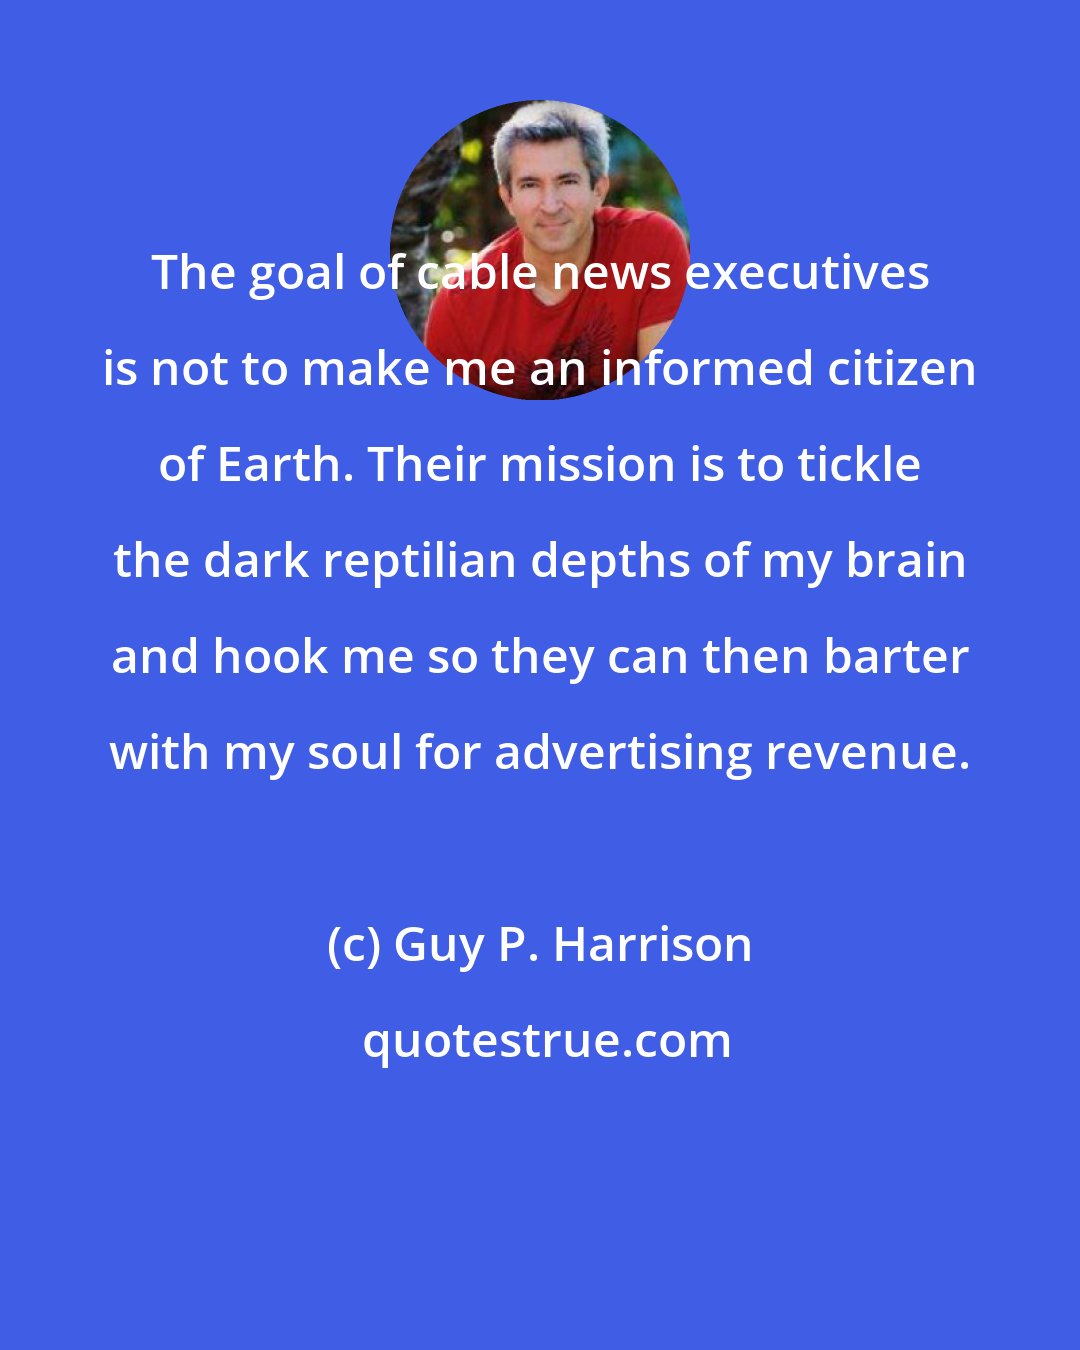 Guy P. Harrison: The goal of cable news executives is not to make me an informed citizen of Earth. Their mission is to tickle the dark reptilian depths of my brain and hook me so they can then barter with my soul for advertising revenue.